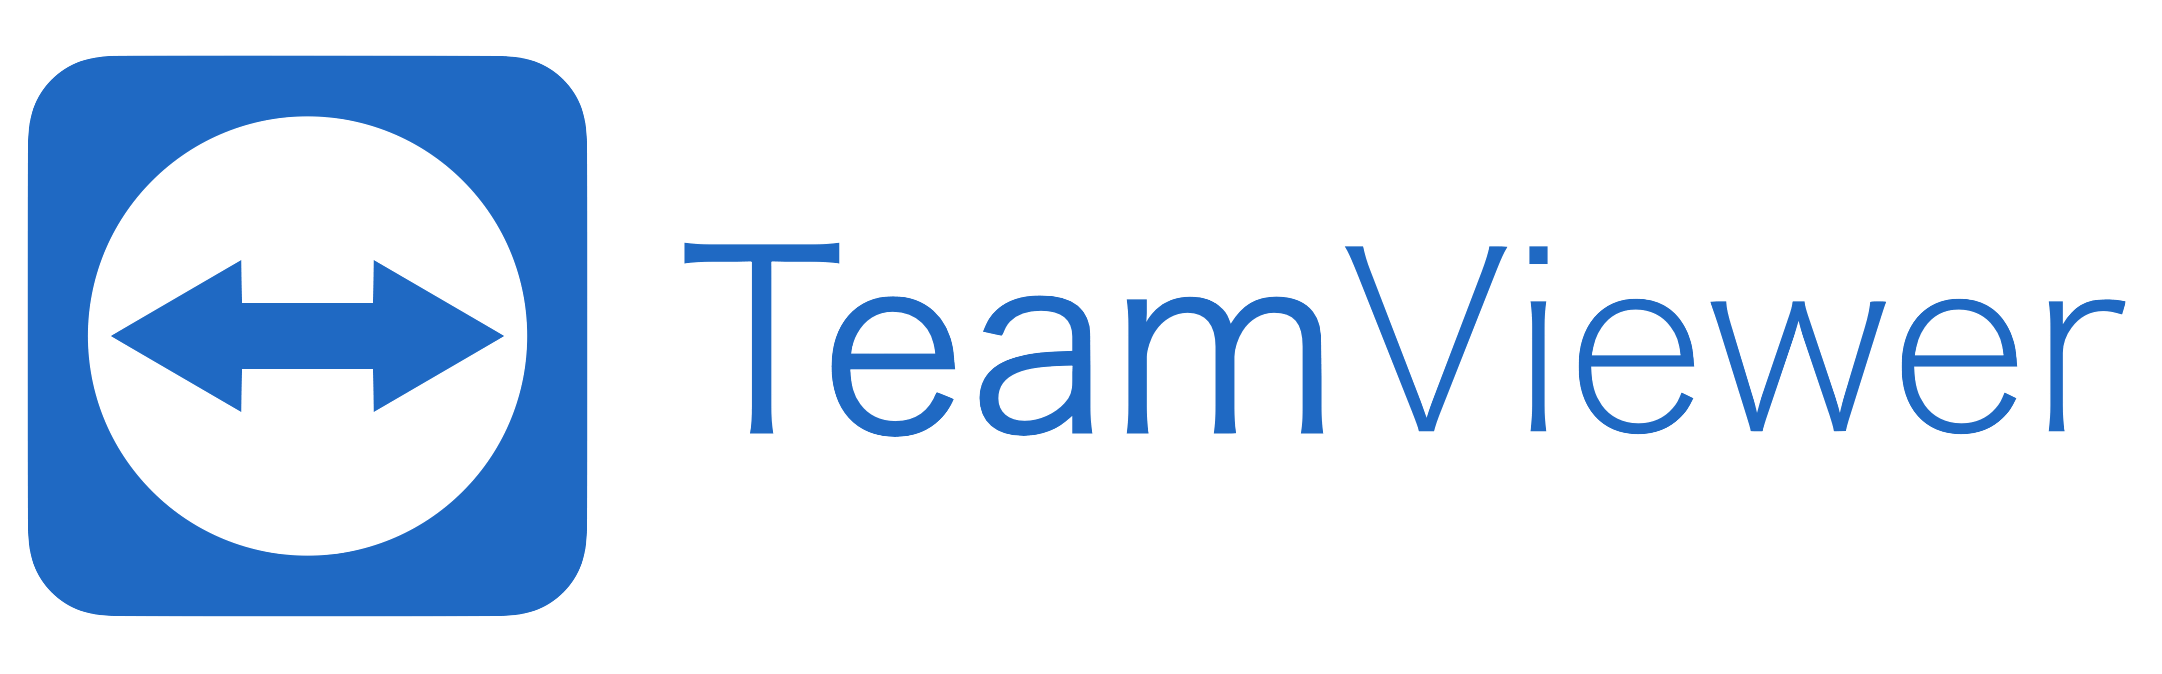 what is teamviewer gmbh